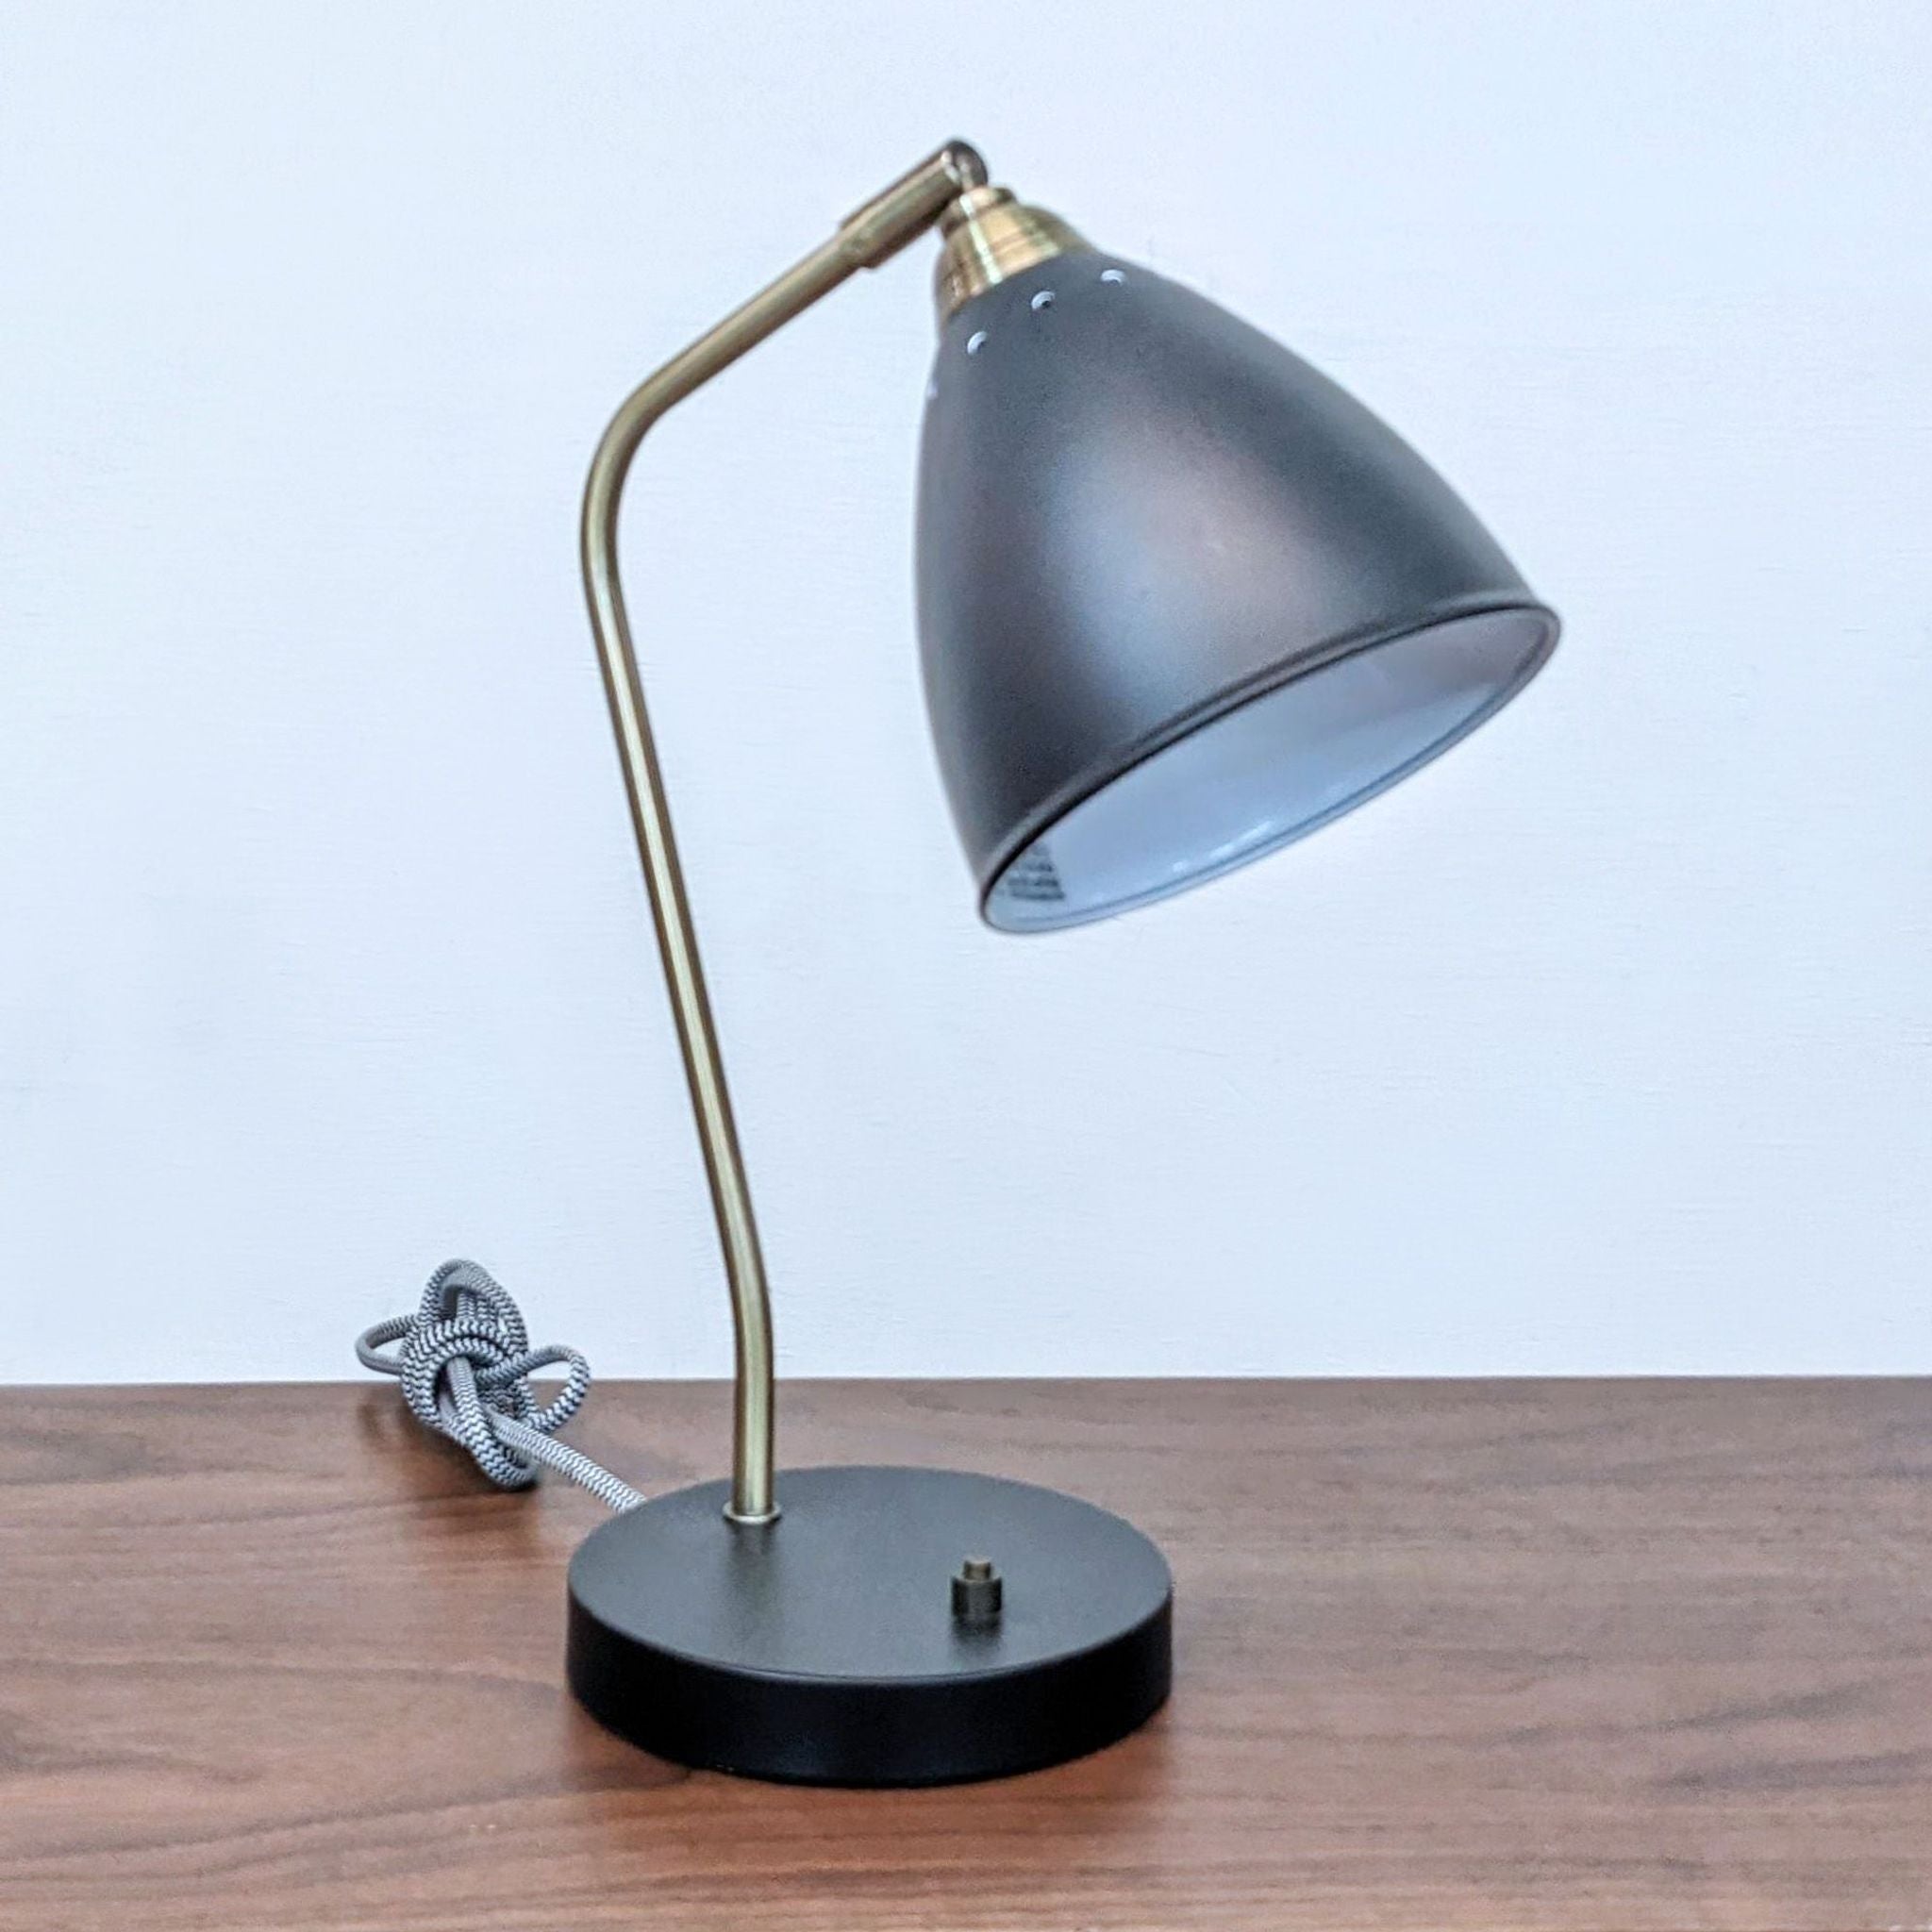 Reperch brand desk lamp with an adjustable gold arm and gray shade, placed on a wooden surface.